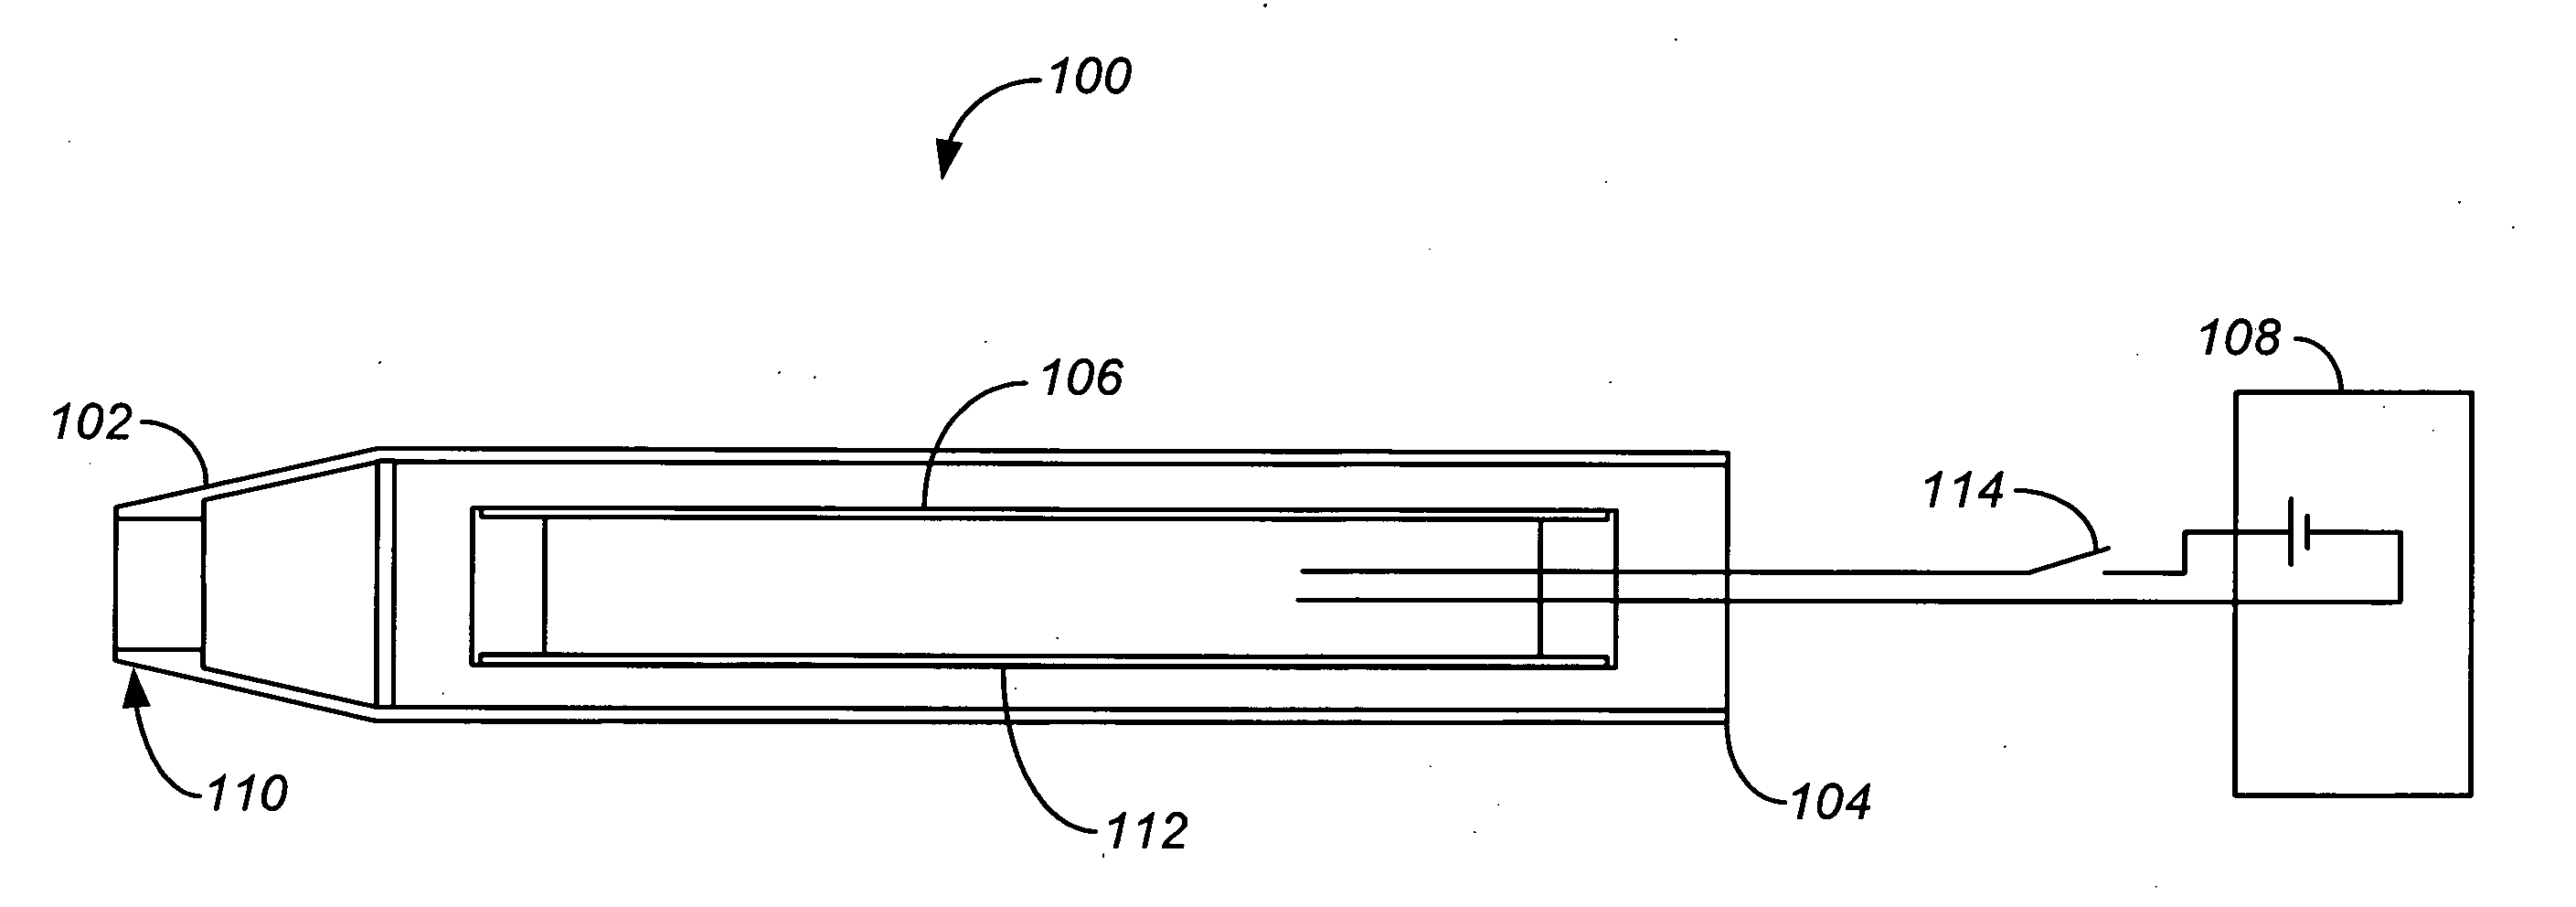 Aerosol delivery system and uses thereof